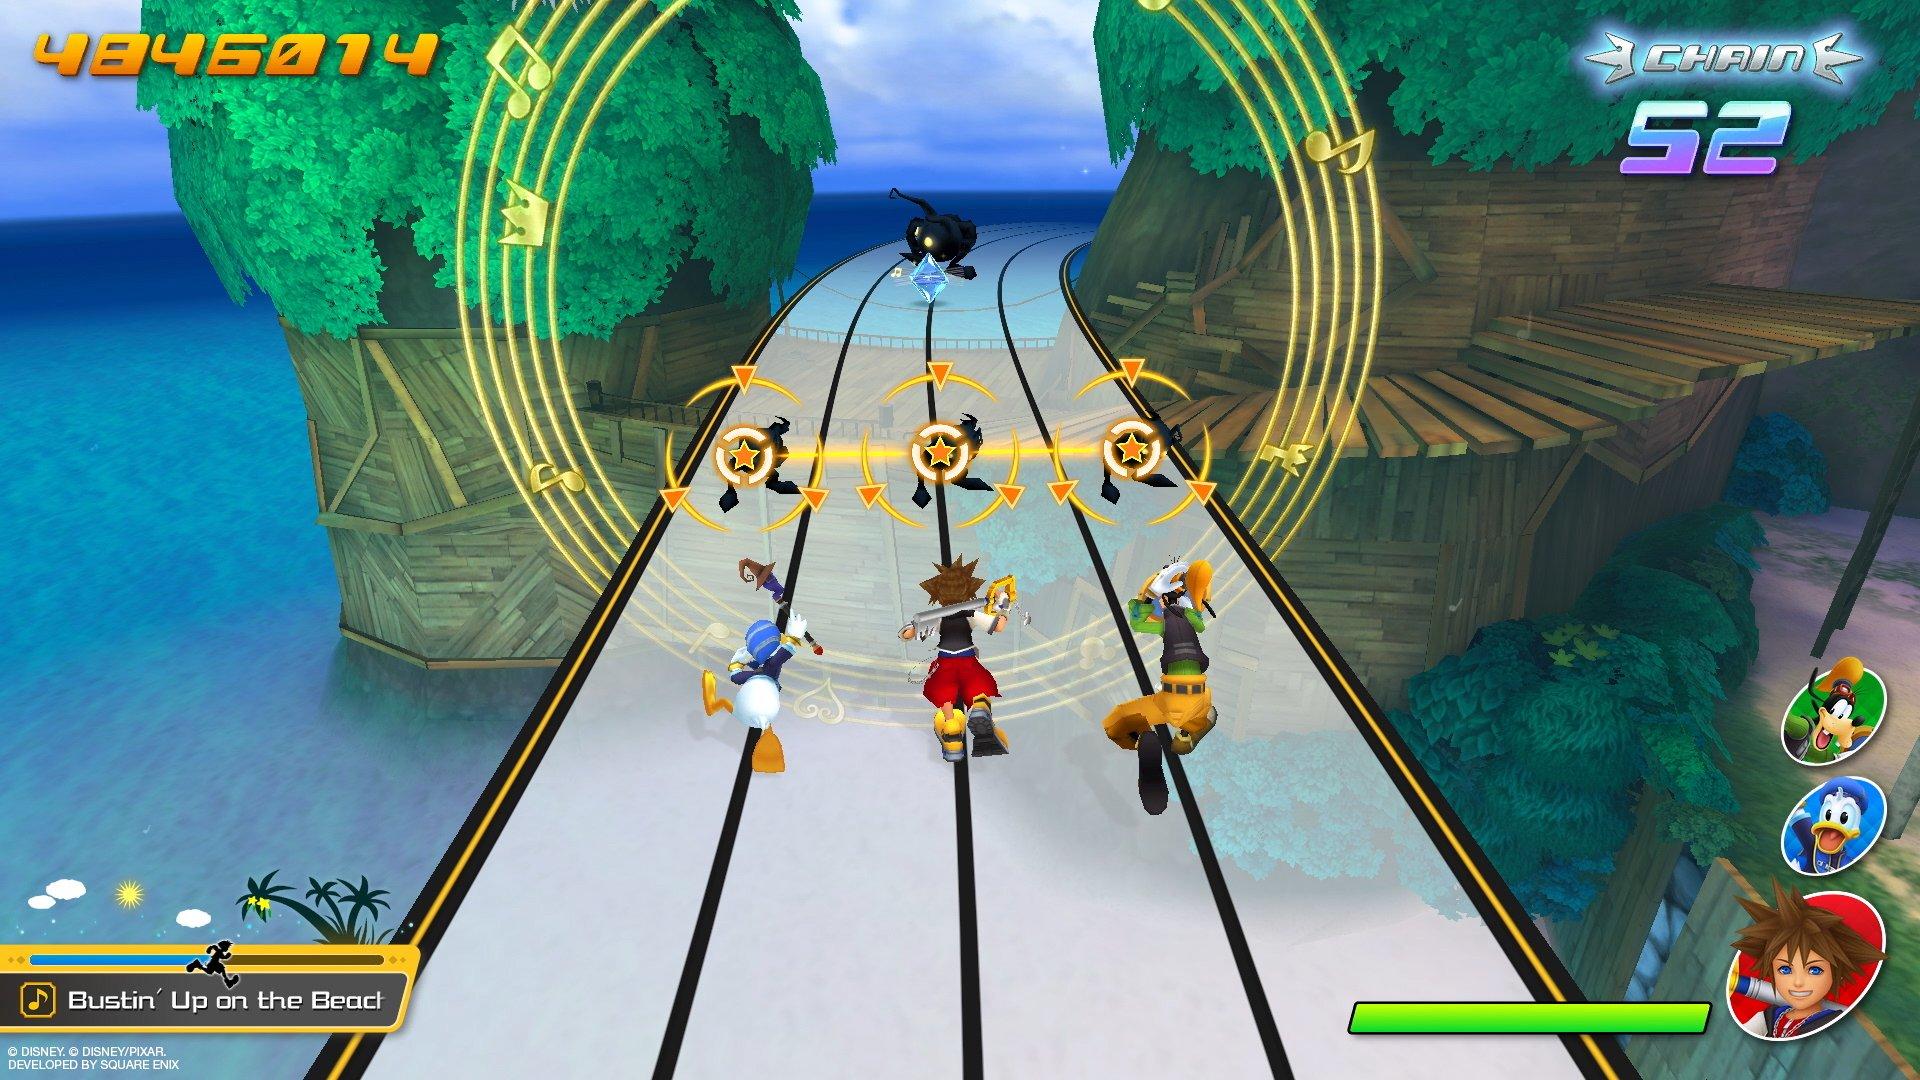 Kingdom Hearts: Melody of Memory – Is It Important To The Story